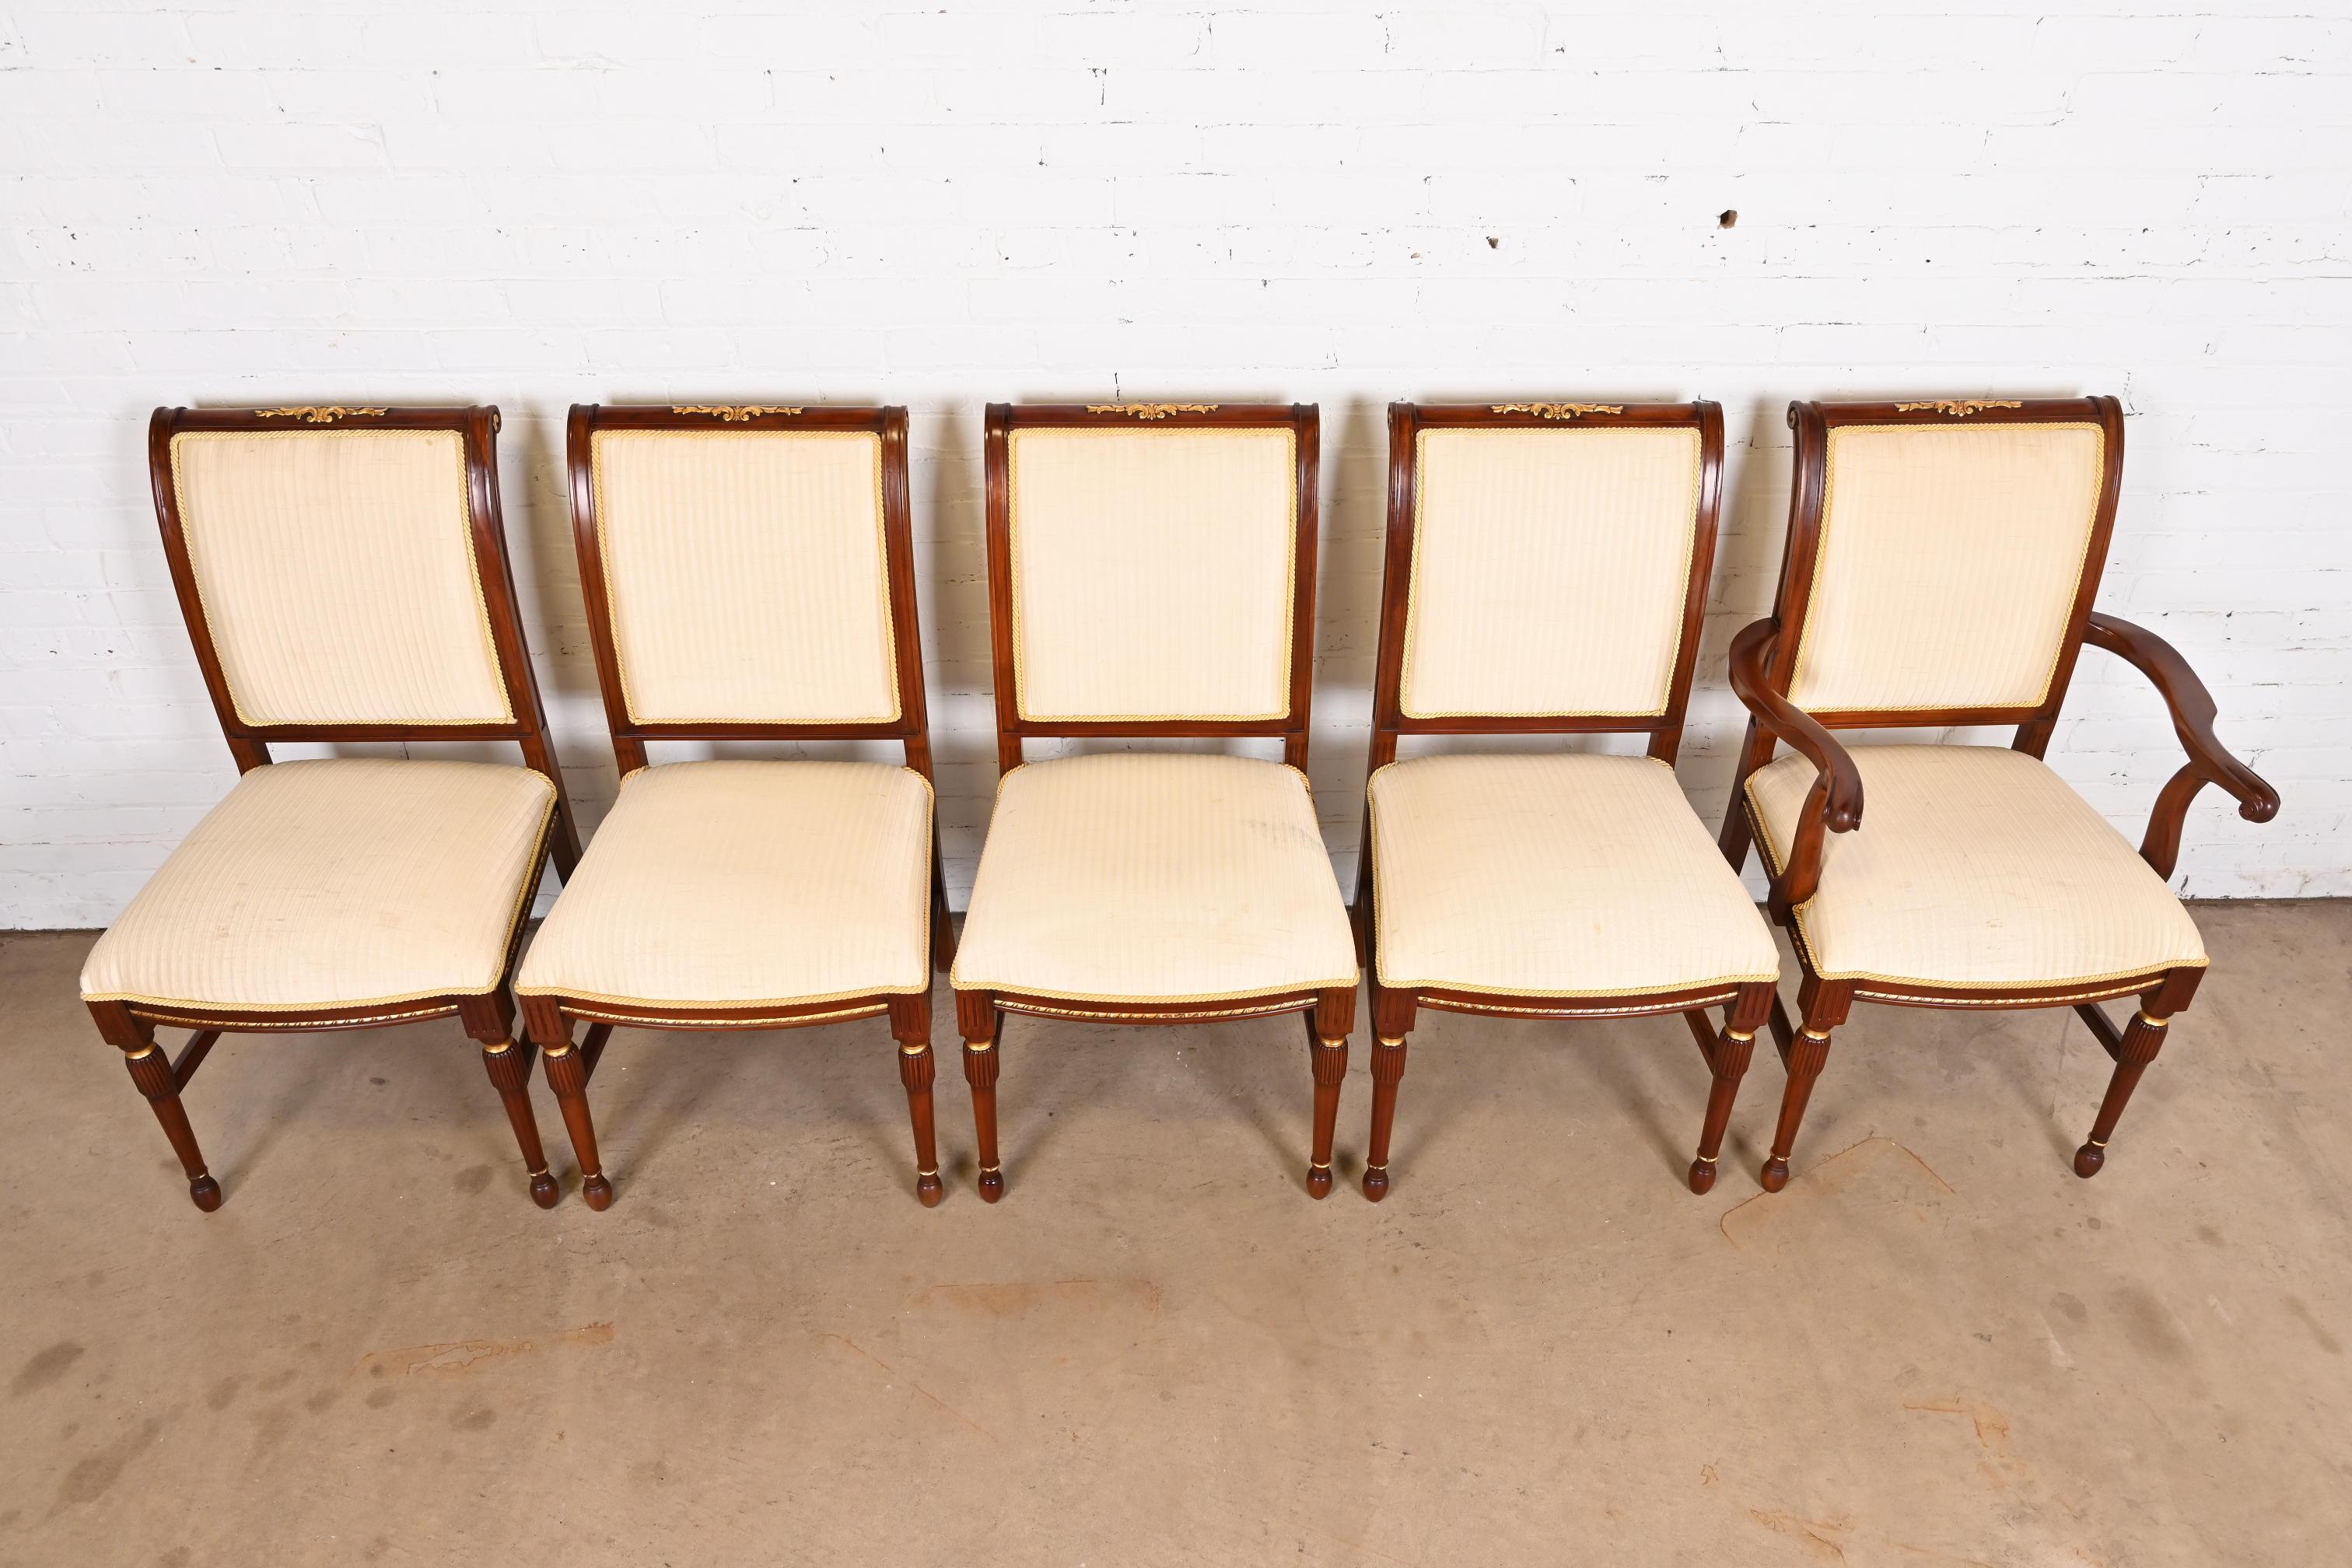 20th Century French Regency Louis XVI Carved Mahogany Dining Chairs in the Manner of Karges For Sale